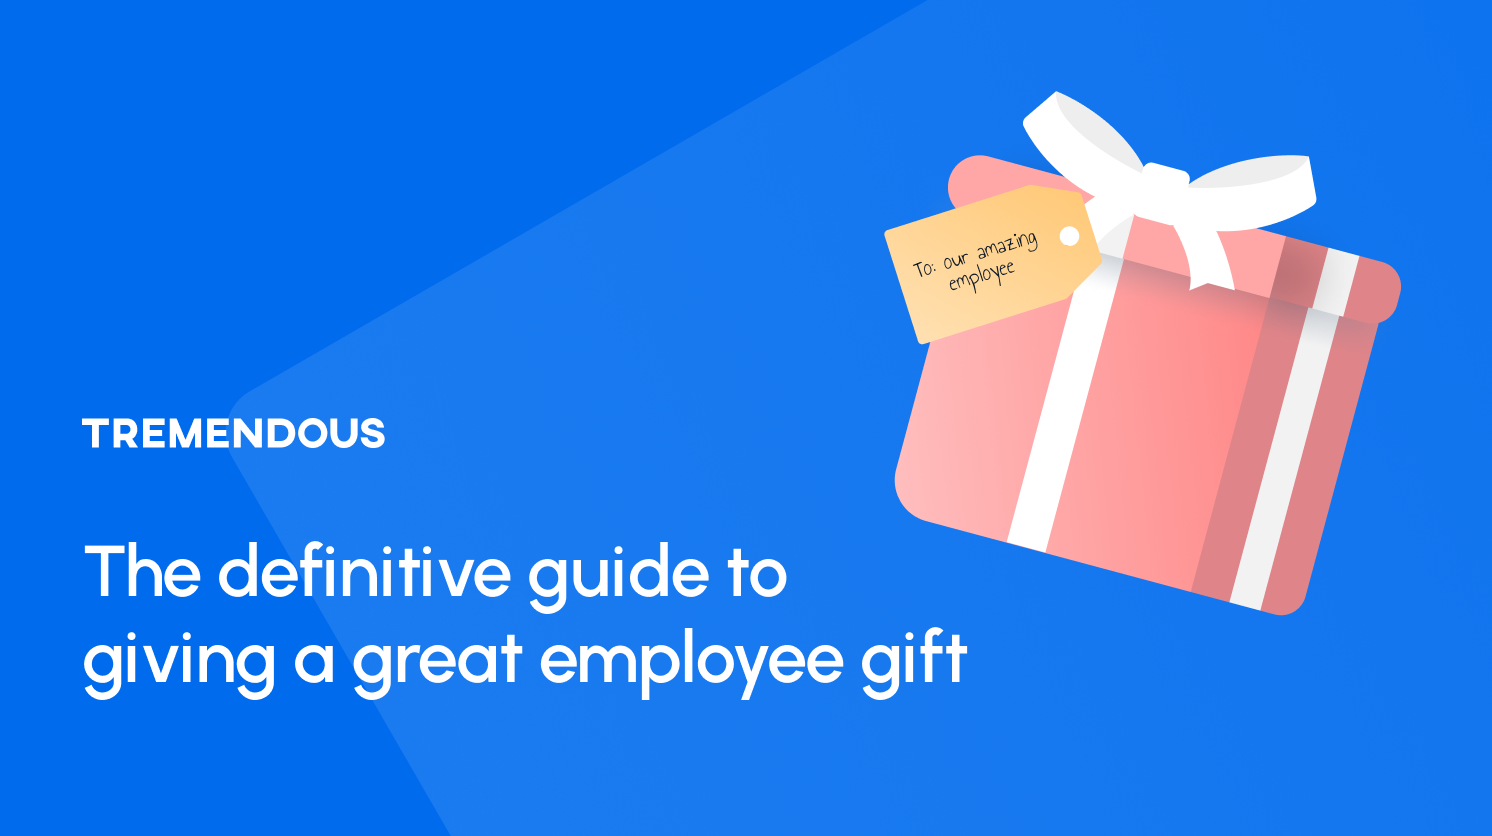 The definitive guide to giving a great employee gift